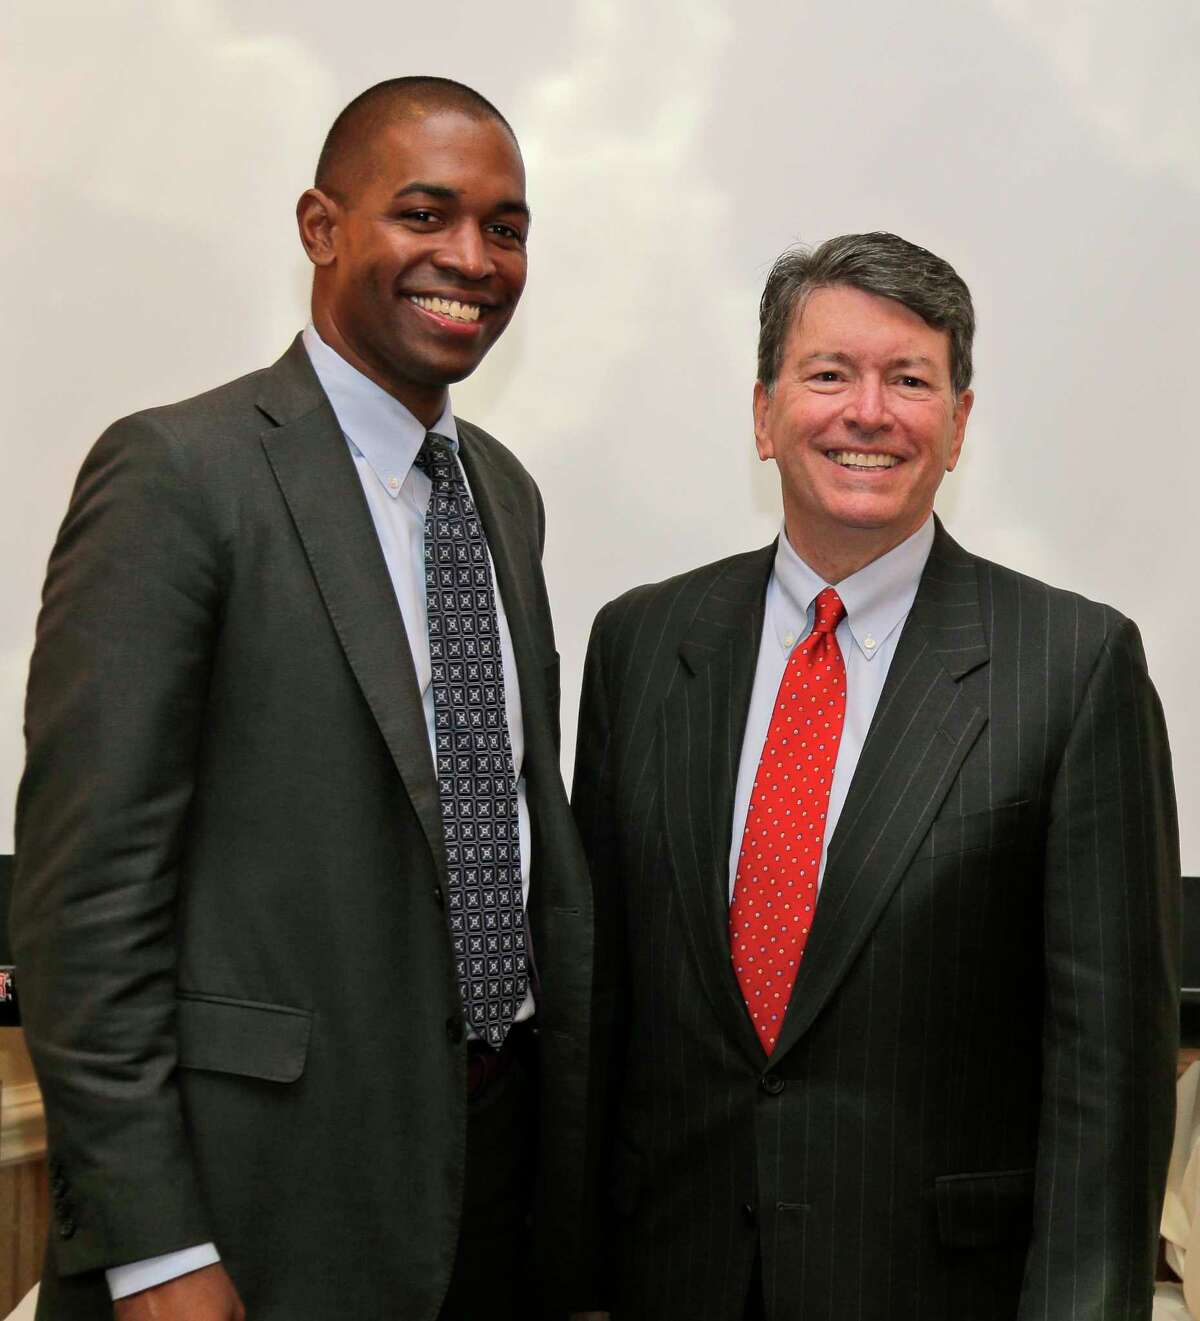 Republican U.S. Rep. John Faso, right, and his Democratic challenger, Antonio Delgado, pose for a picture after a candidate forum in Poughkeepsie, N.Y., Wednesday, Oct. 17, 2018. Hip-hop, health care and Brett Kavanaugh have emerged as issues in a too-close-to-call congressional race in New York?’s Hudson Valley that pits the freshman Republican congressman against a rapper-turned-corporate lawyer seeking his first political office. (AP Photo/Seth Wenig)